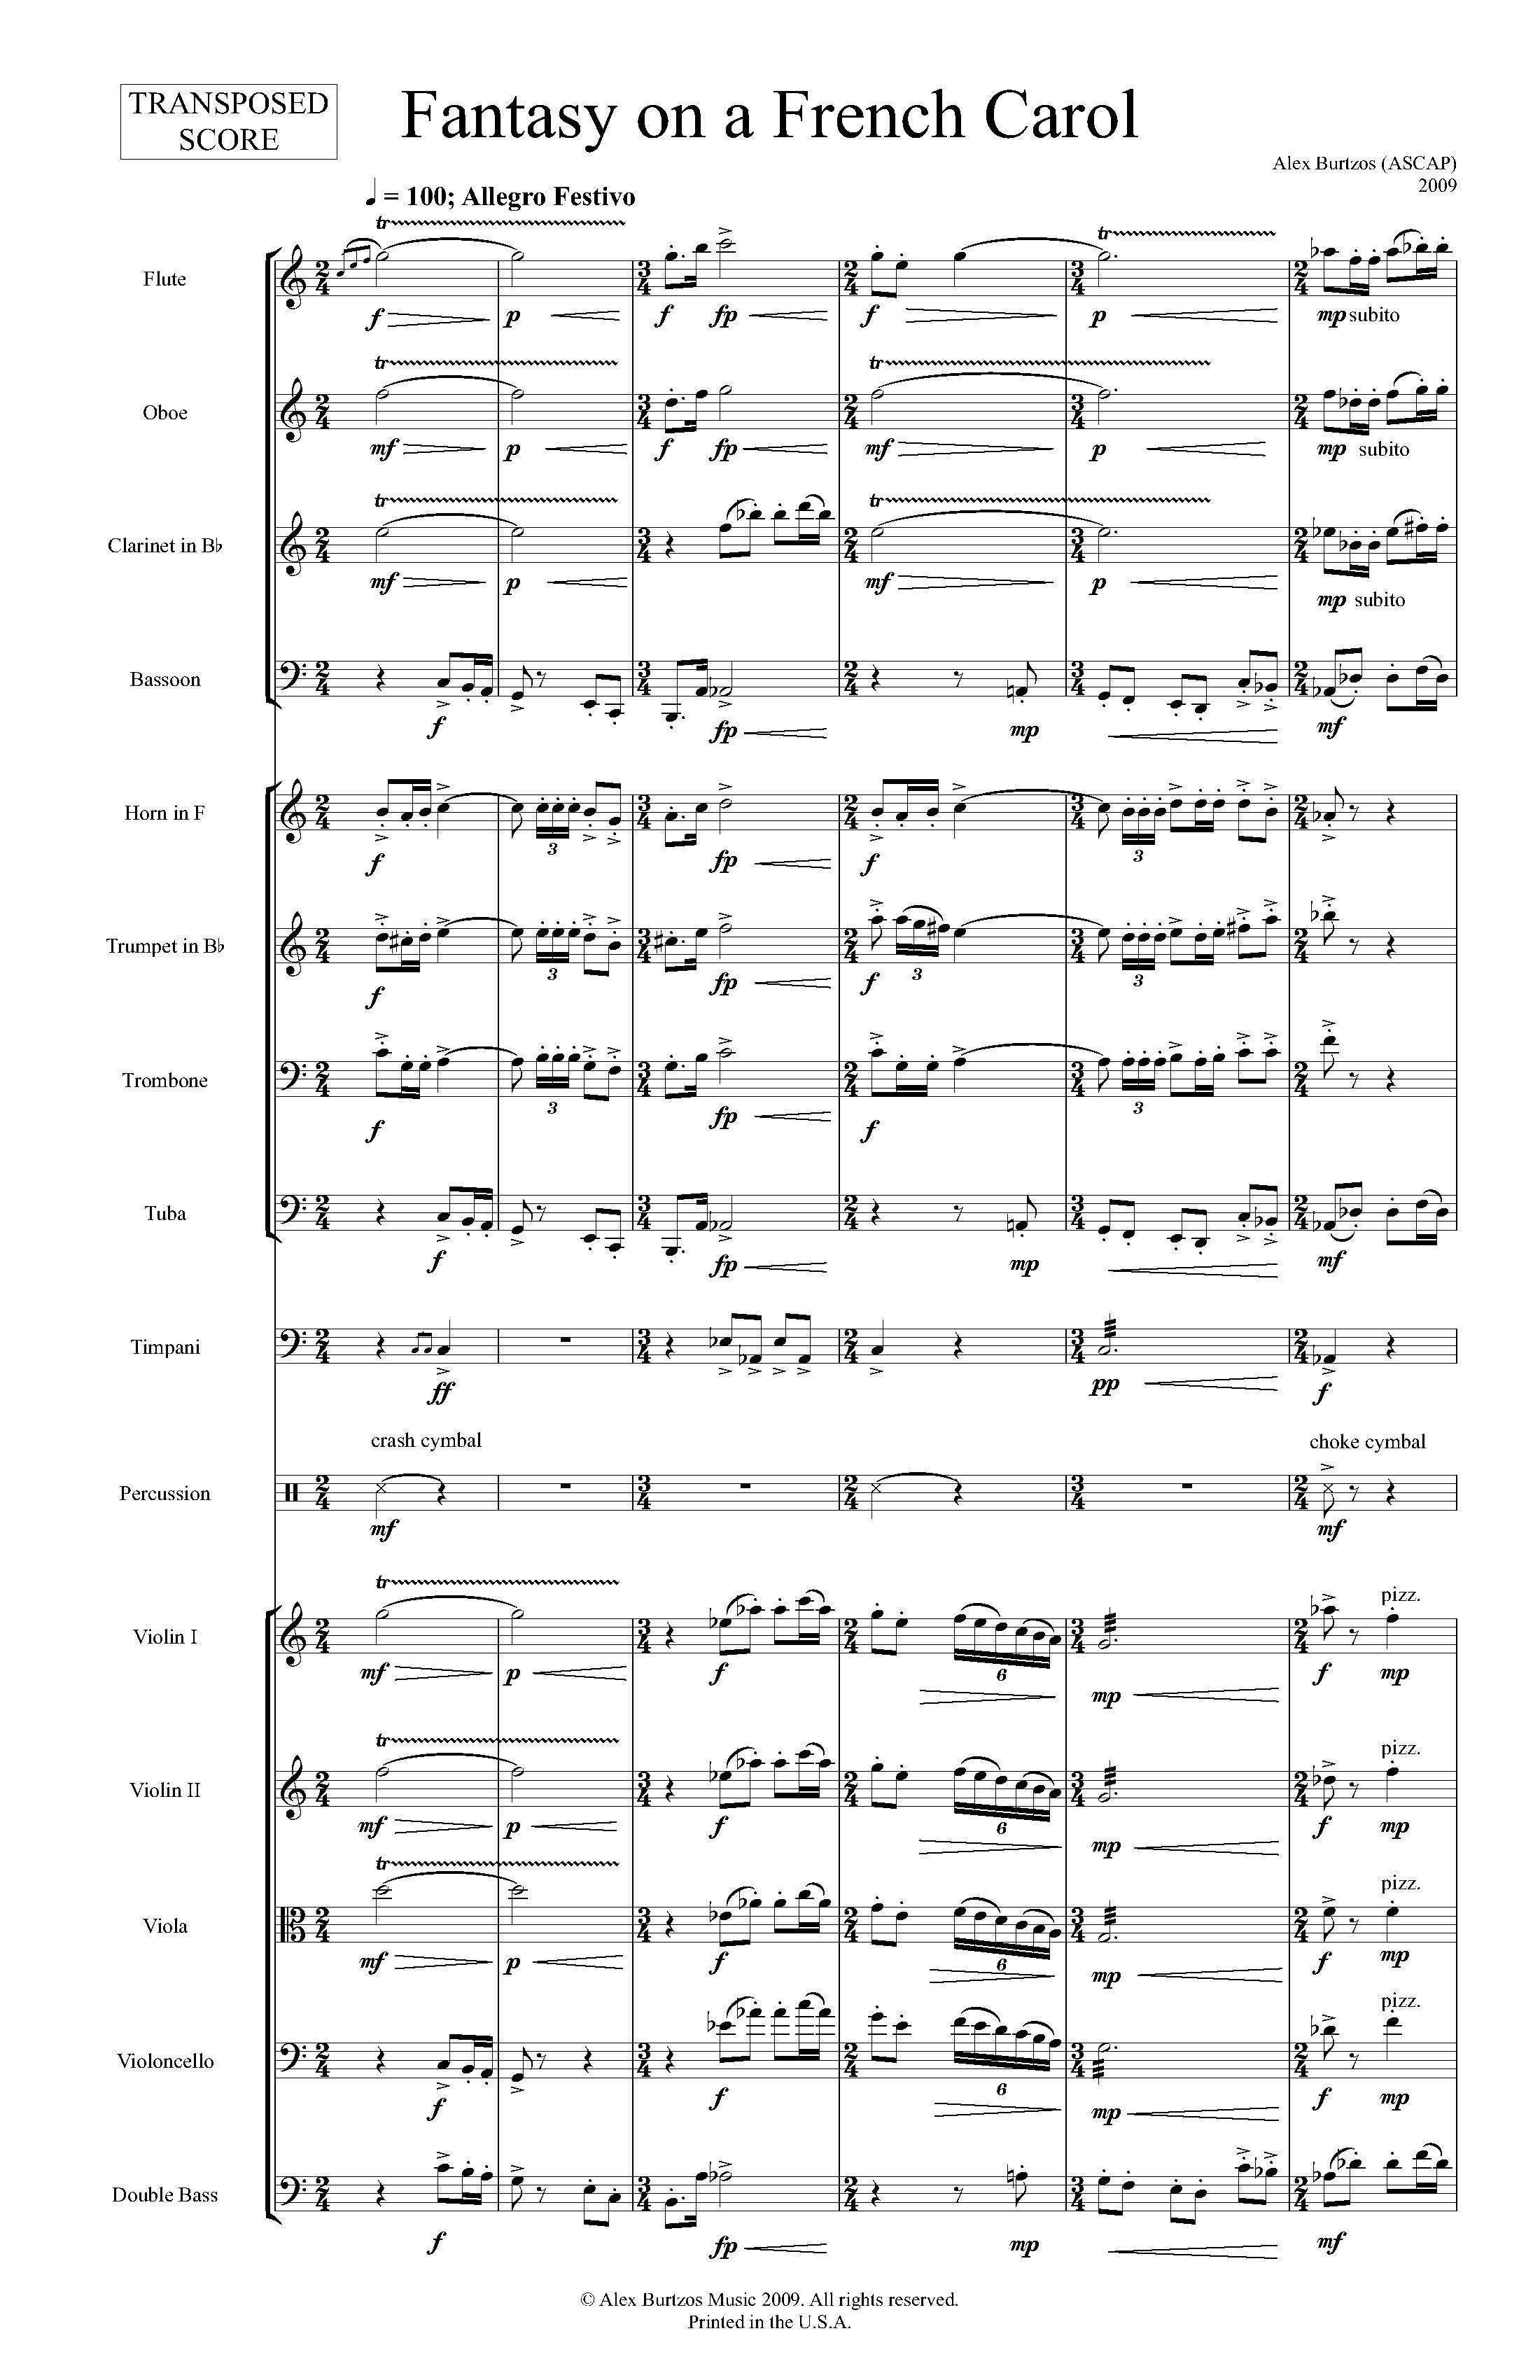 Fantasy on a French Carol - Complete Score_Page_05.jpg